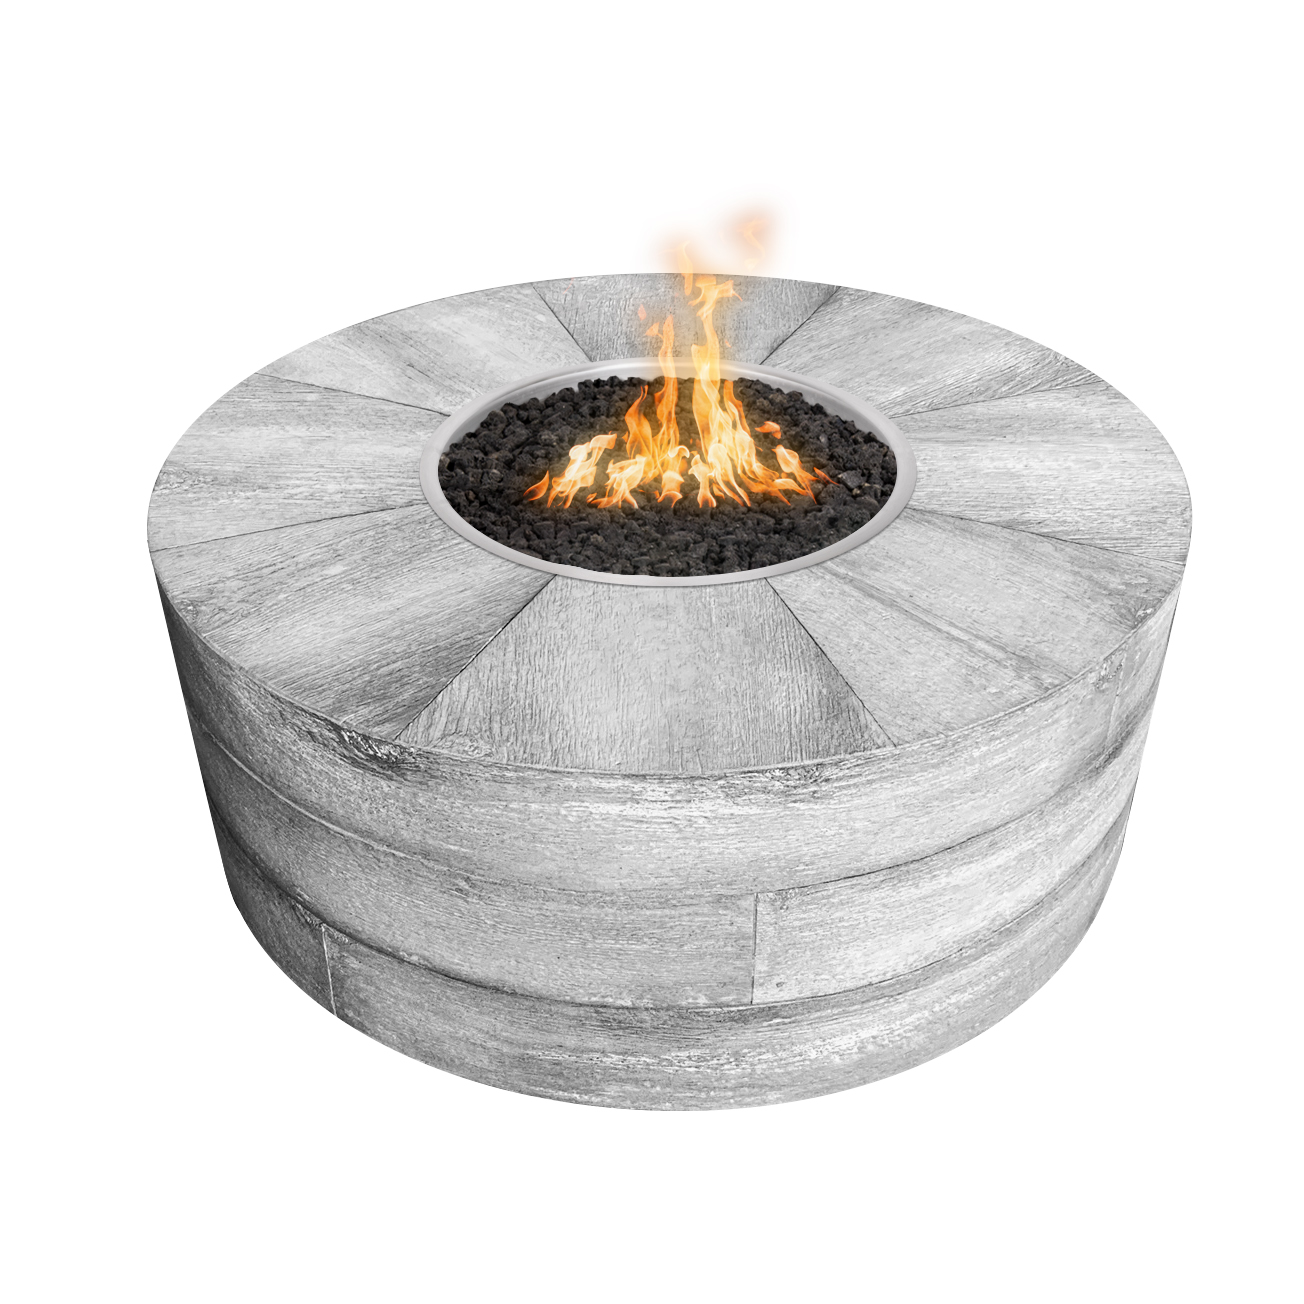 Sequoia Wood Grain Fire Pit The, Sequoia Fire Pit